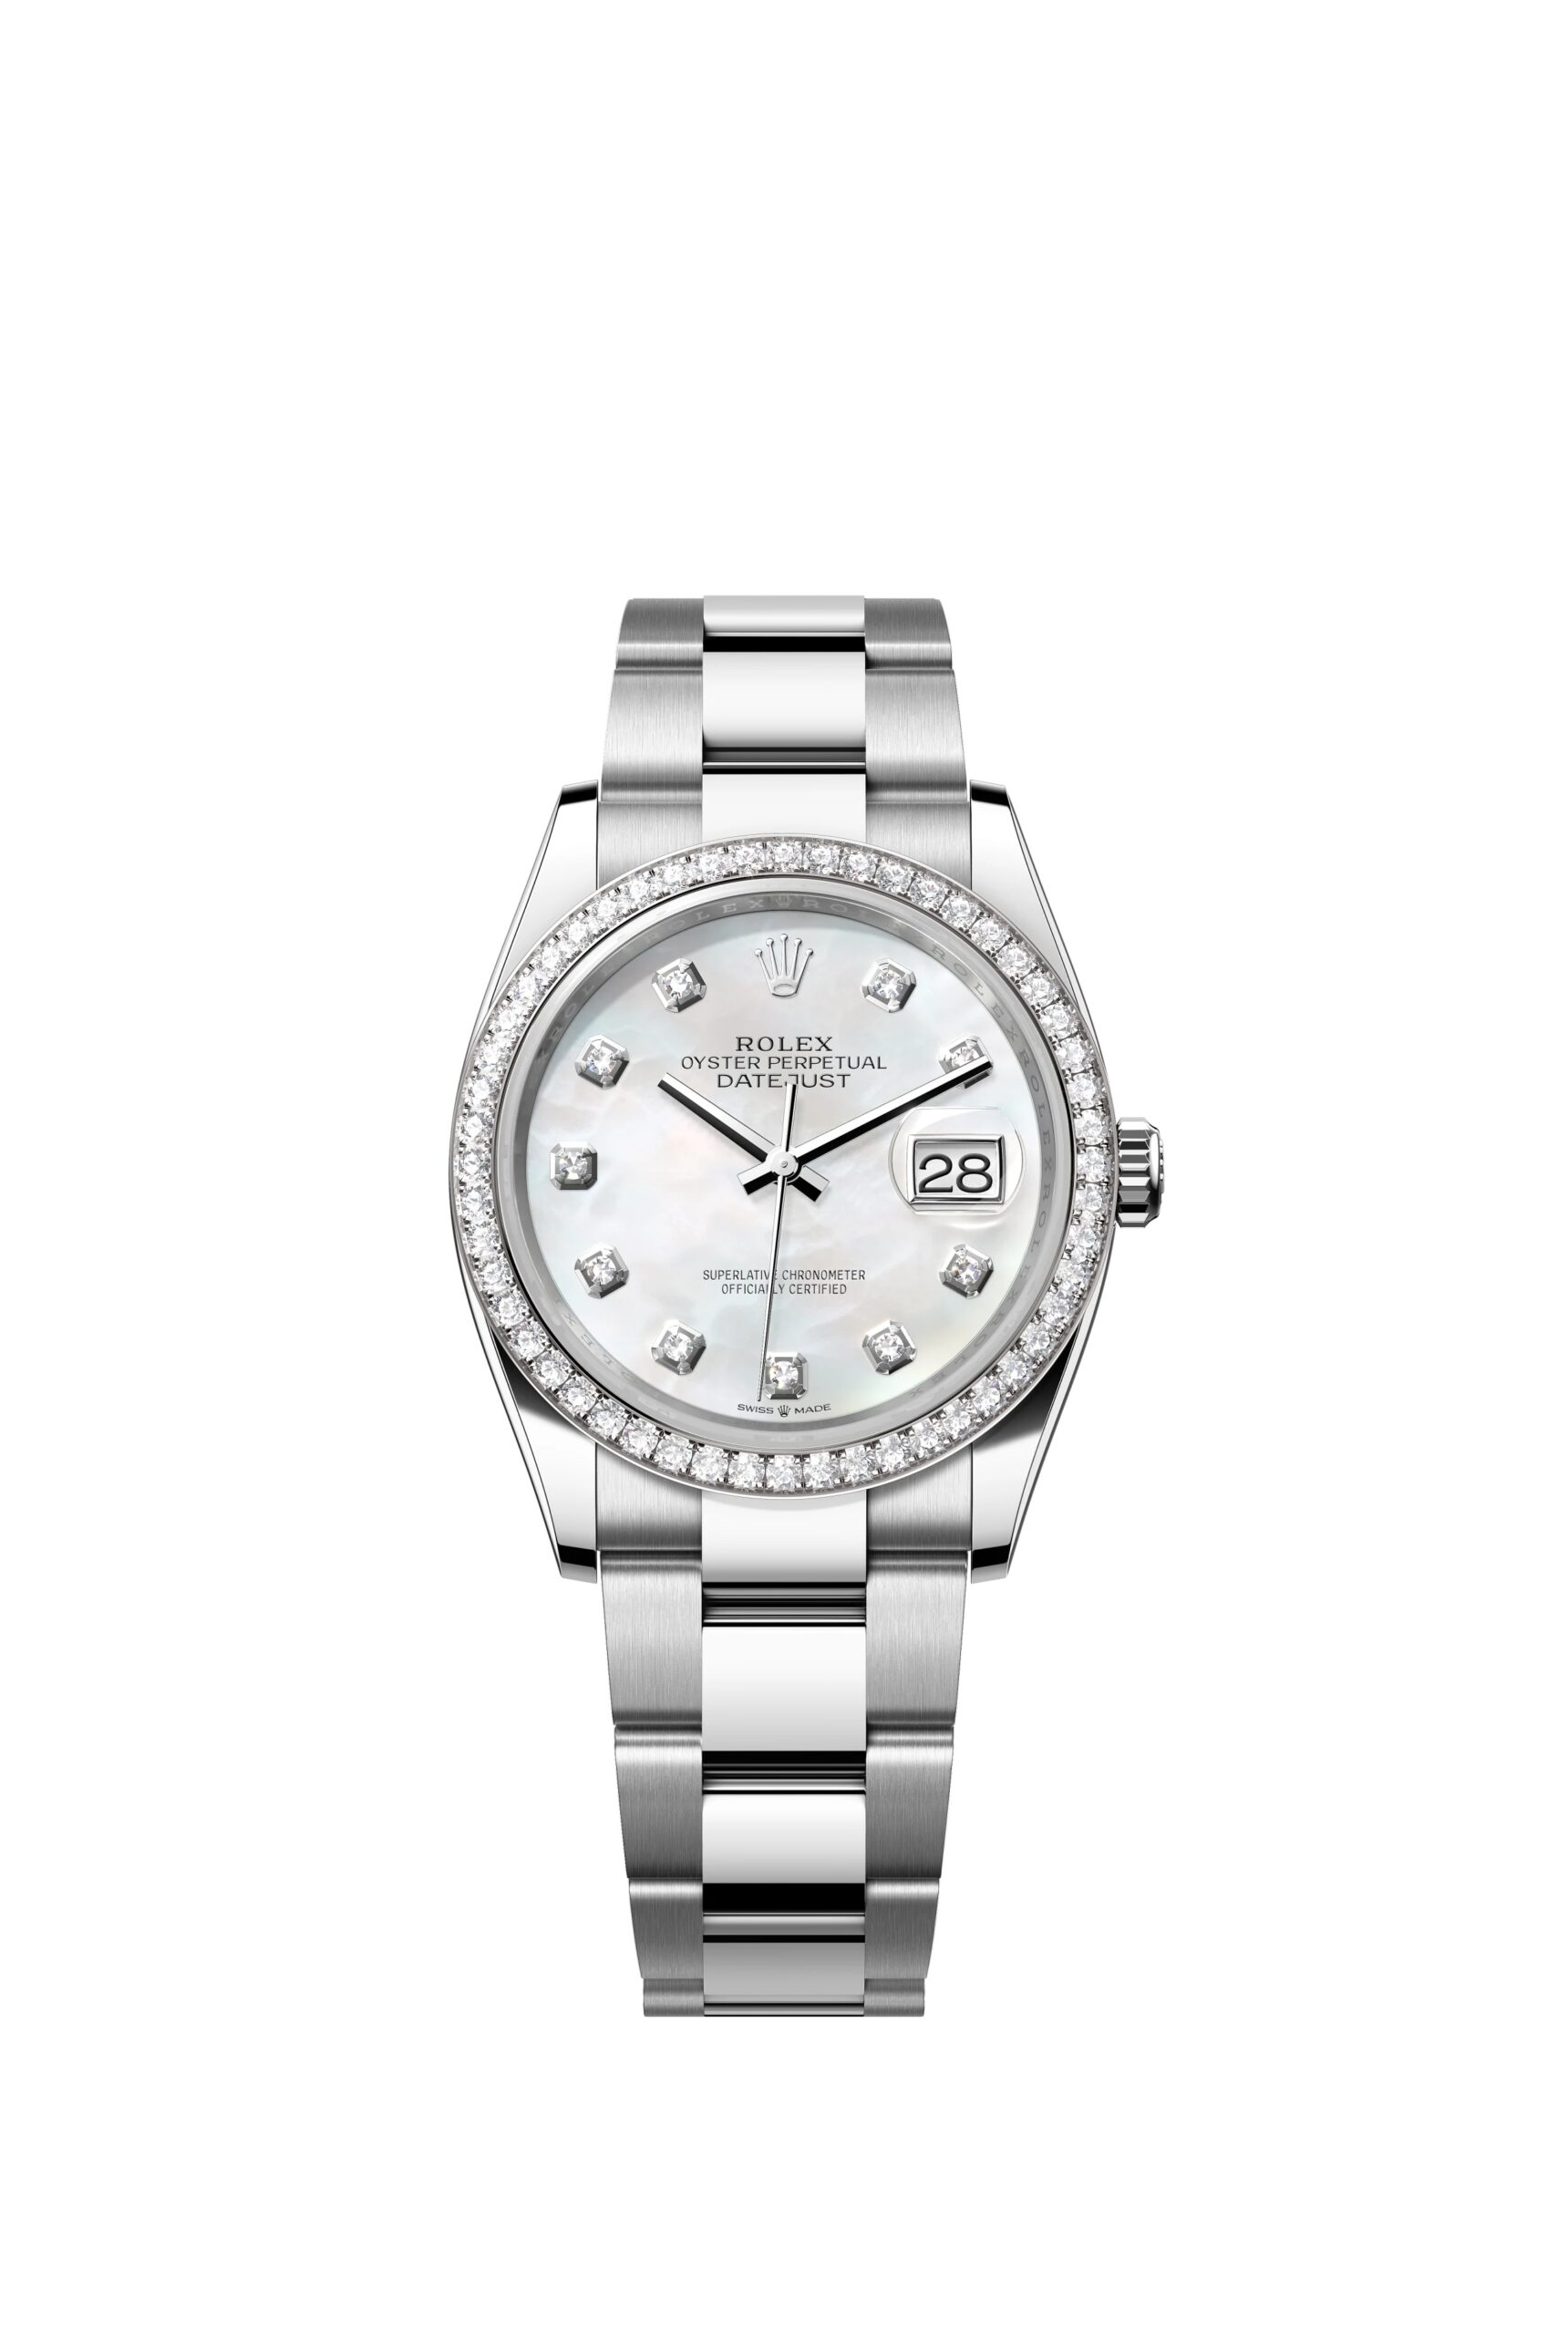 Rolex Datejust 36 Oyster, 36 mm, Oystersteel, white gold and diamonds Reference 126284RBR